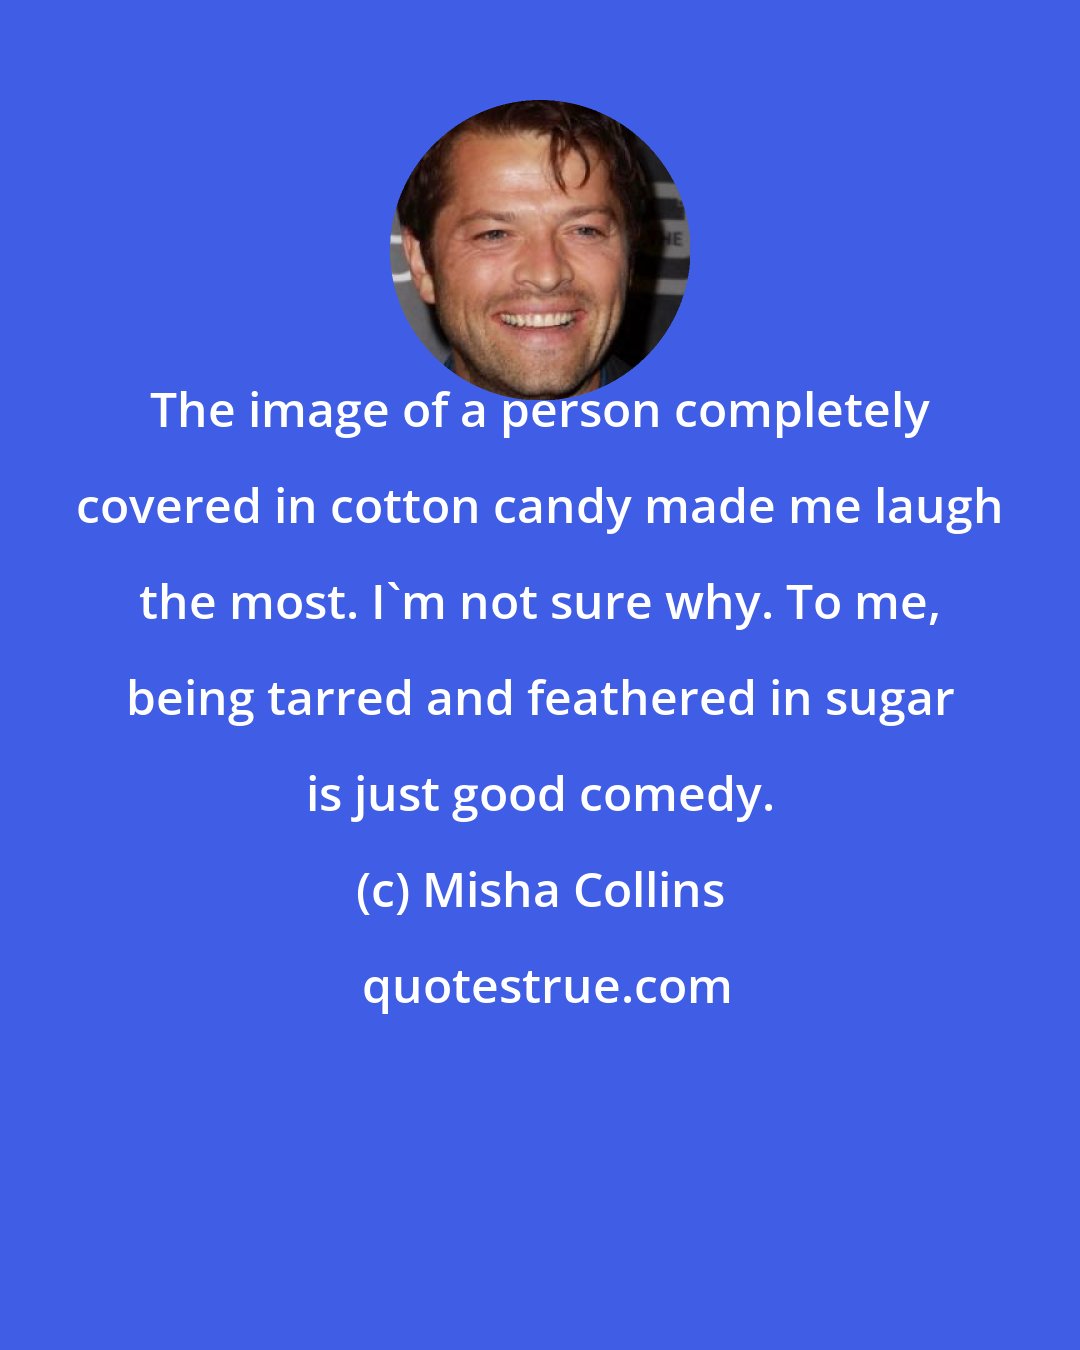 Misha Collins: The image of a person completely covered in cotton candy made me laugh the most. I'm not sure why. To me, being tarred and feathered in sugar is just good comedy.